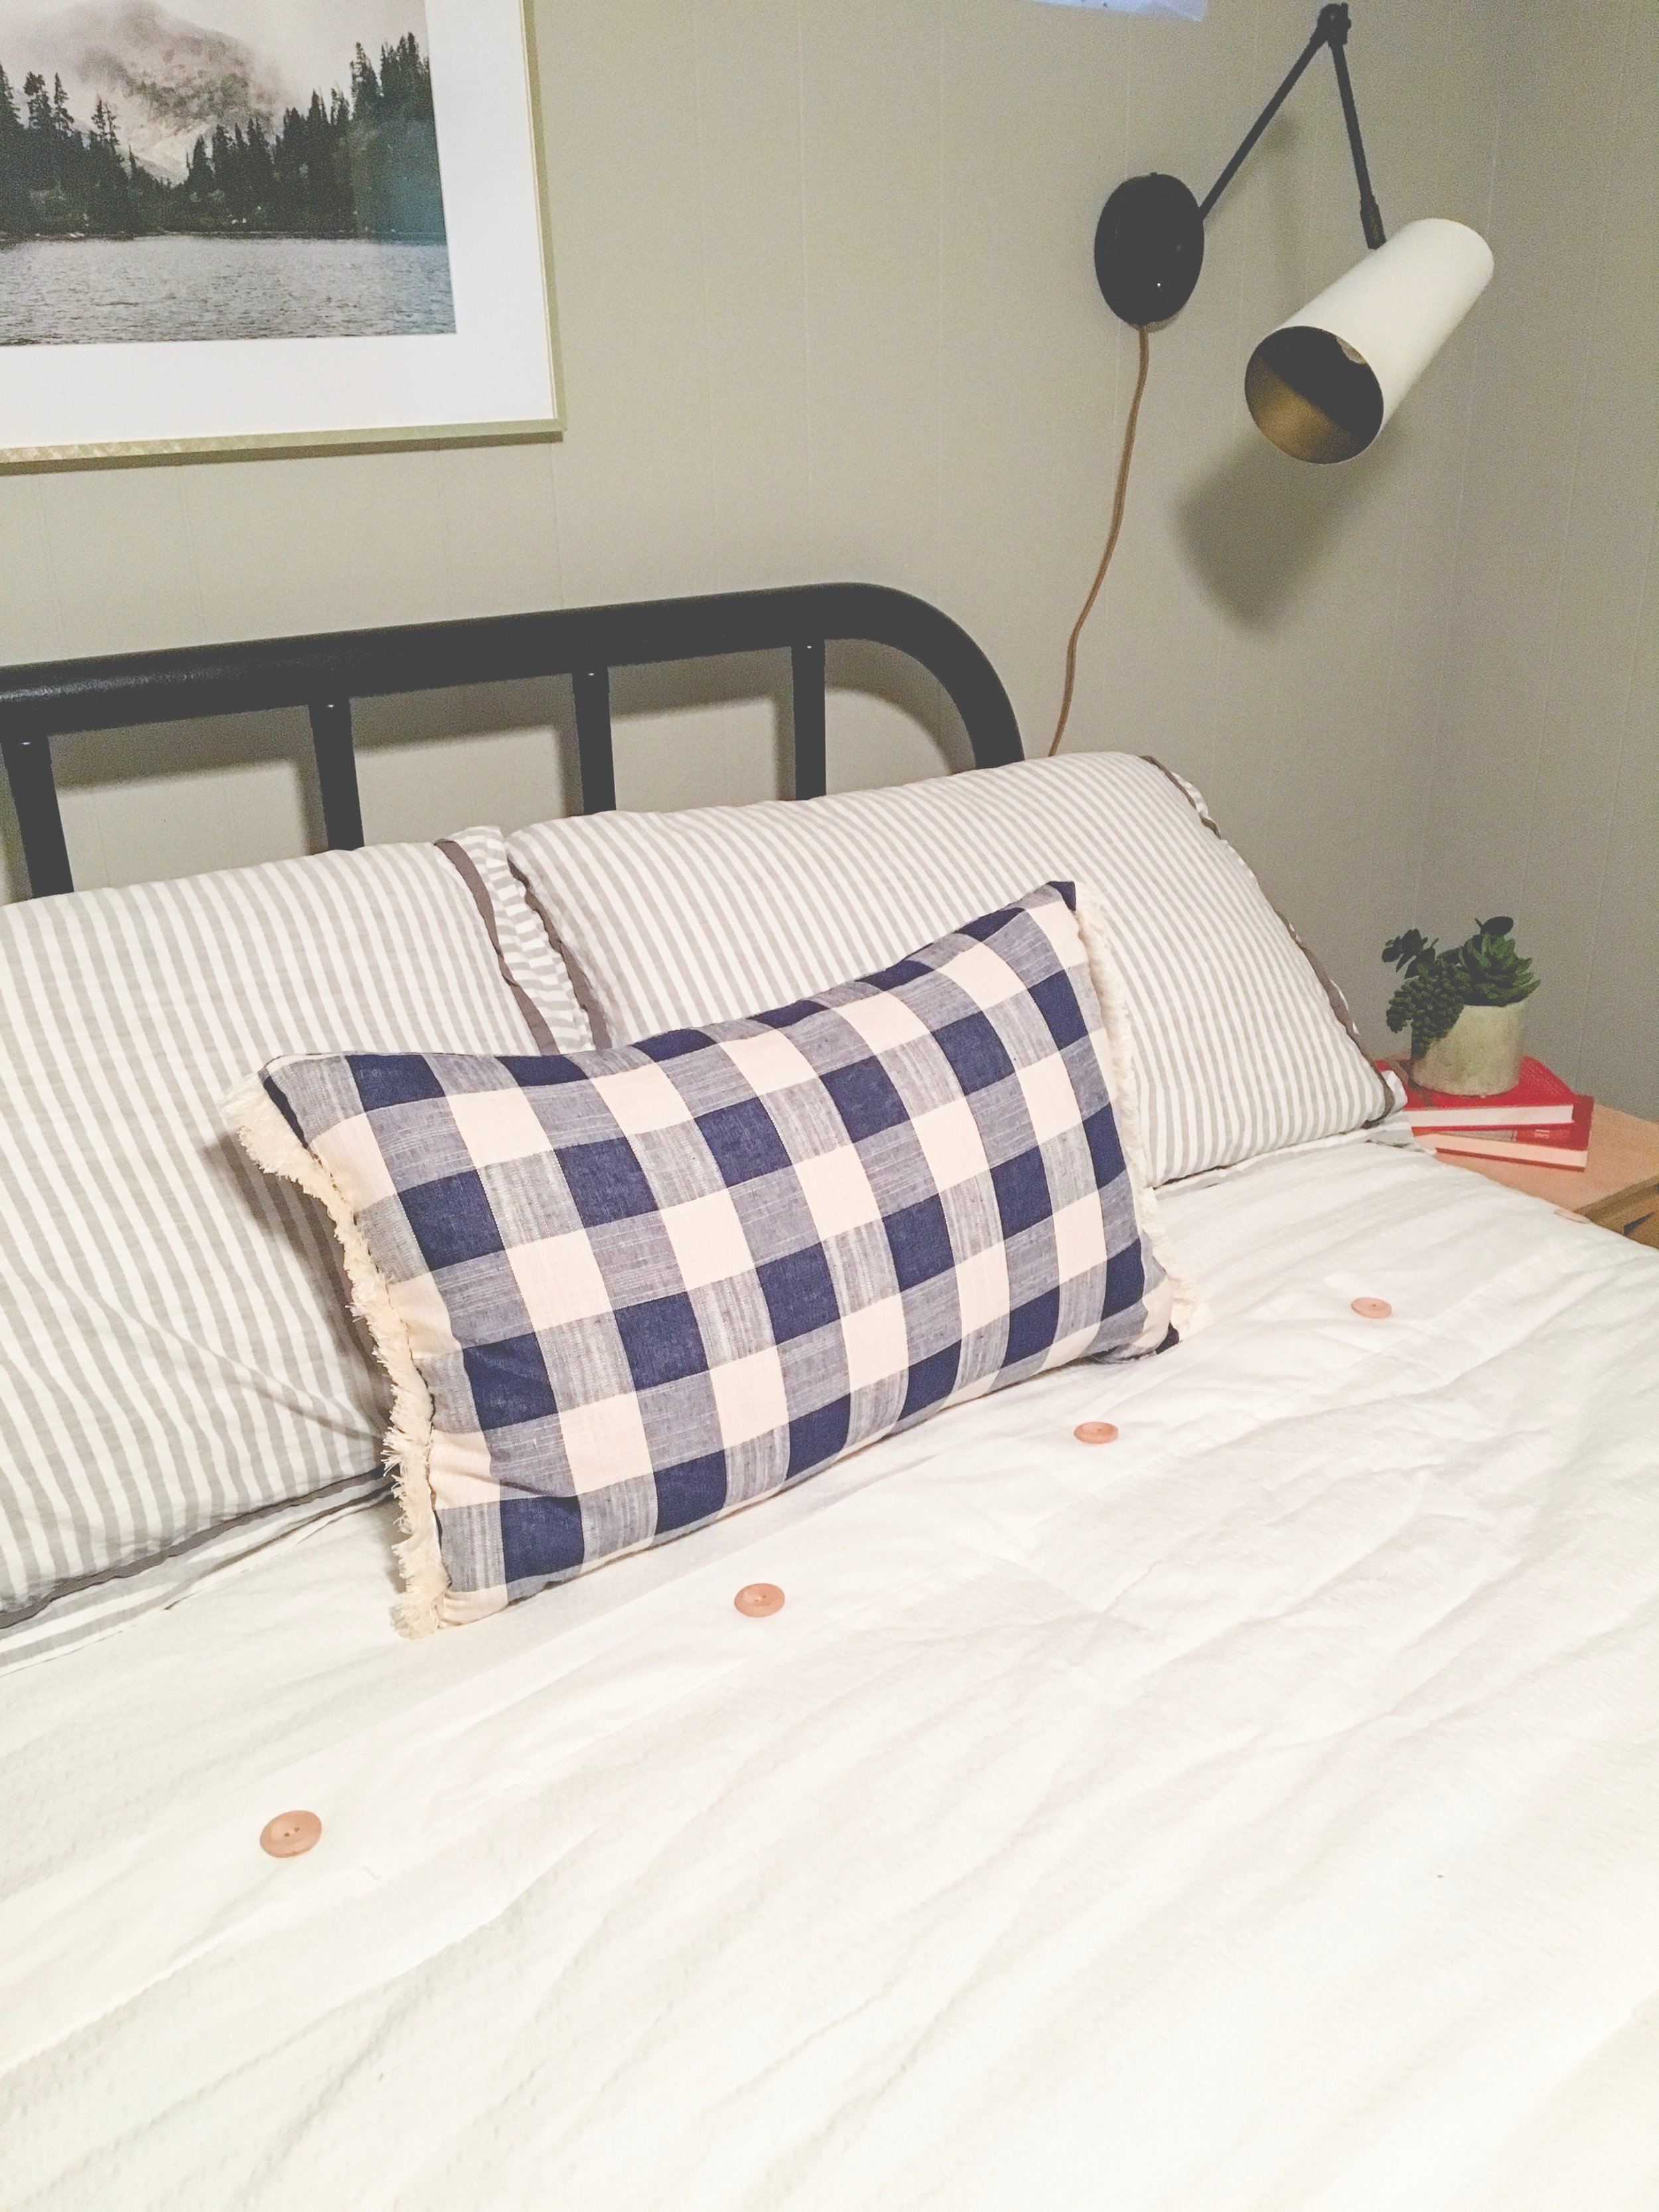 Our boring guest room gets a whole new modern cozy chic cabin look! Learn how to redecorate your guest room so it feels cozy and welcoming. A plaid lumbar pillow is the perfect finishing touch.